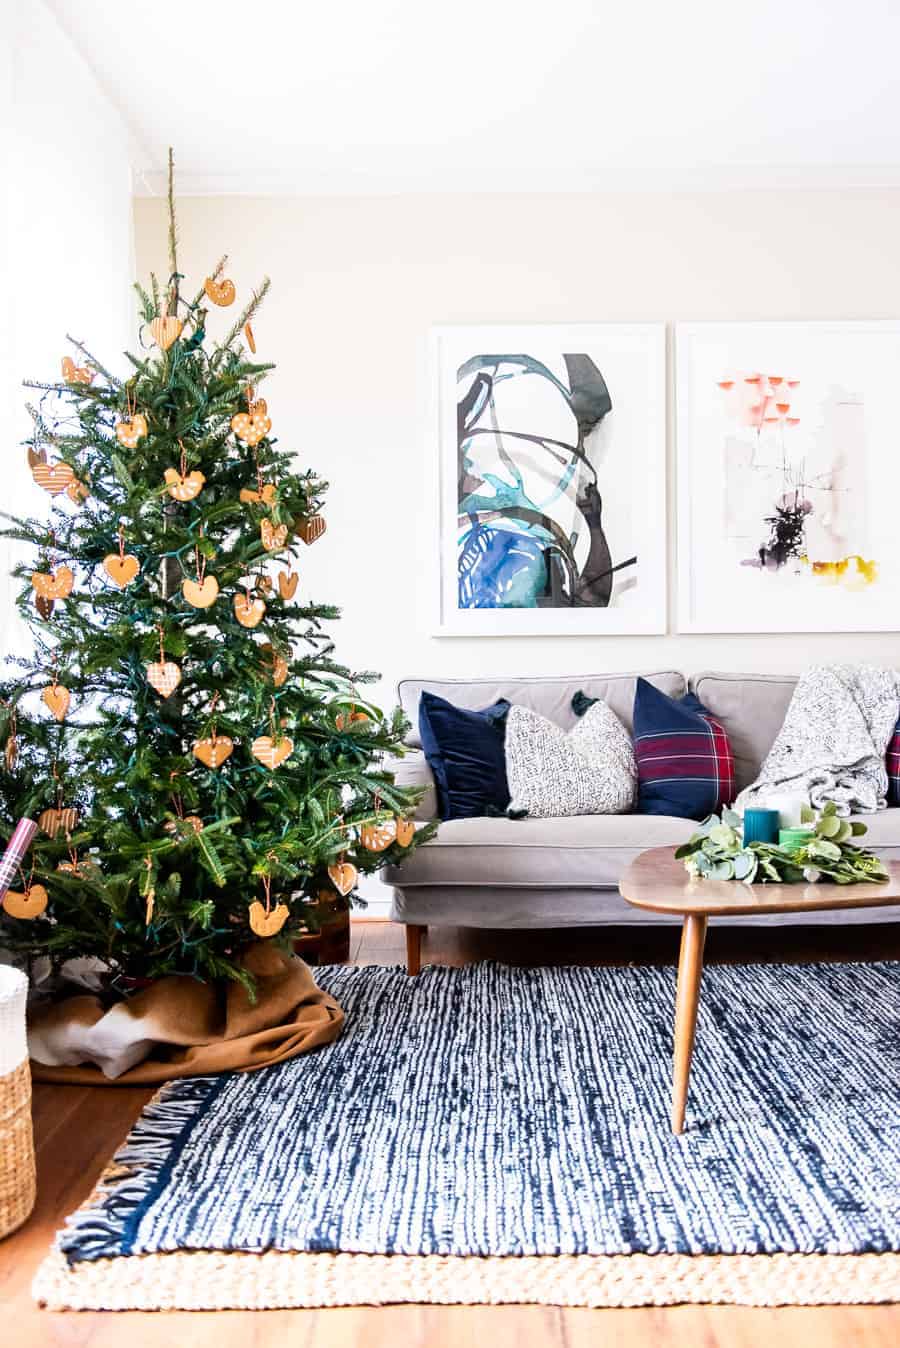 https://placeofmytaste.com/cozy-living-room-for-the-holidays-with-ikea/